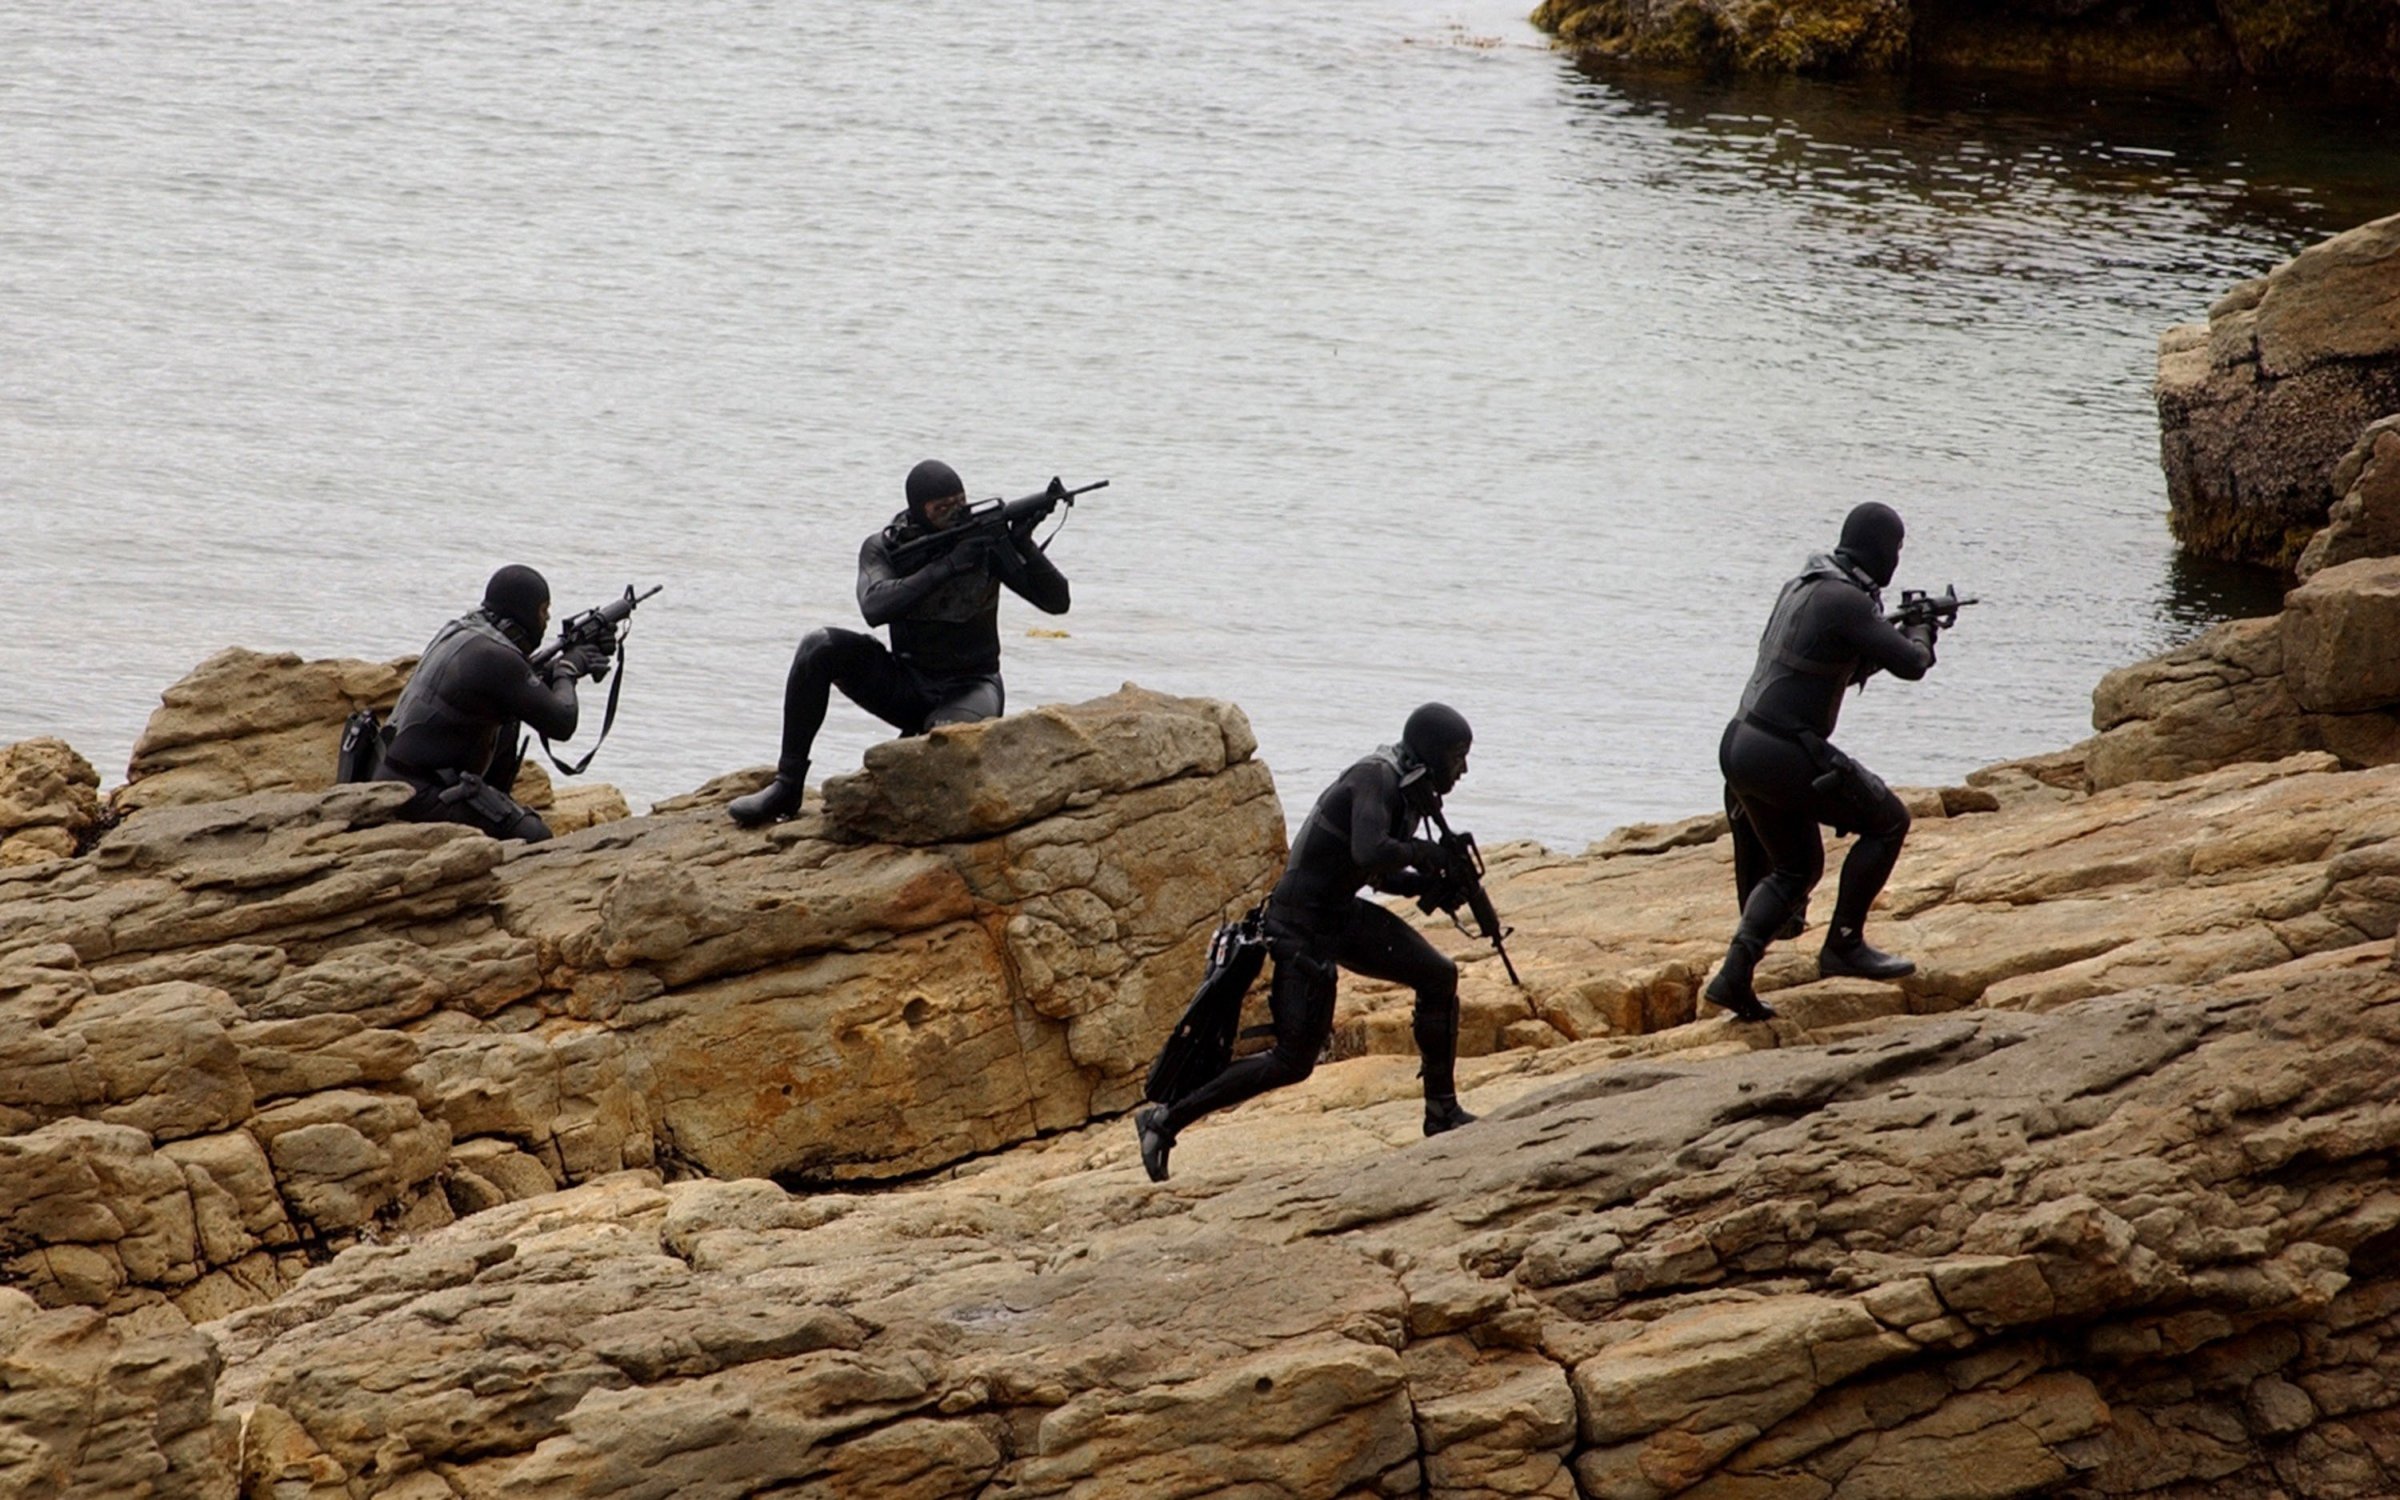 Navy SEALs practice Over The Beach evolutions during a training exercise on May 25, 2004 in a Remote Training Facility.